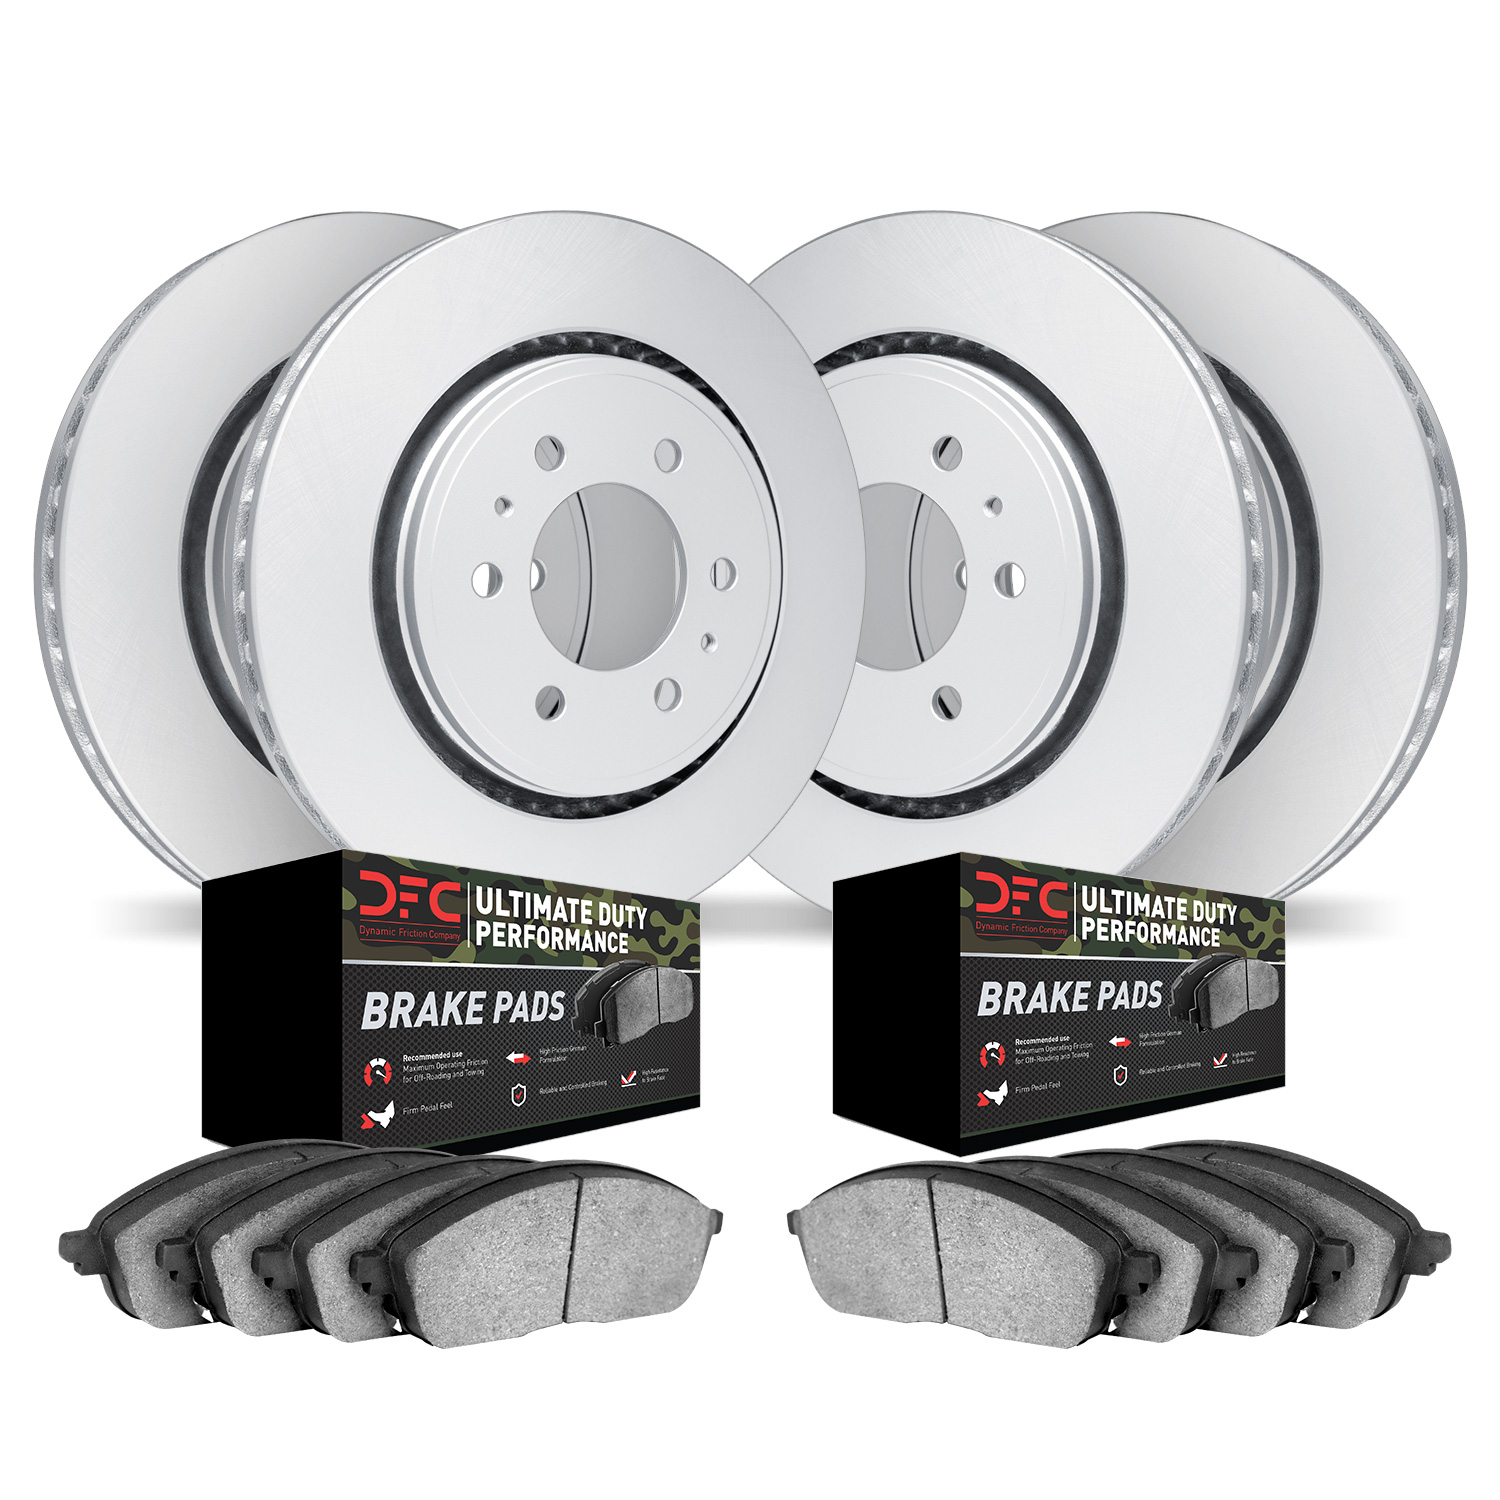 4404-76001 Geospec Brake Rotors with Ultimate-Duty Brake Pads Kit, 2001-2002 Lexus/Toyota/Scion, Position: Front and Rear